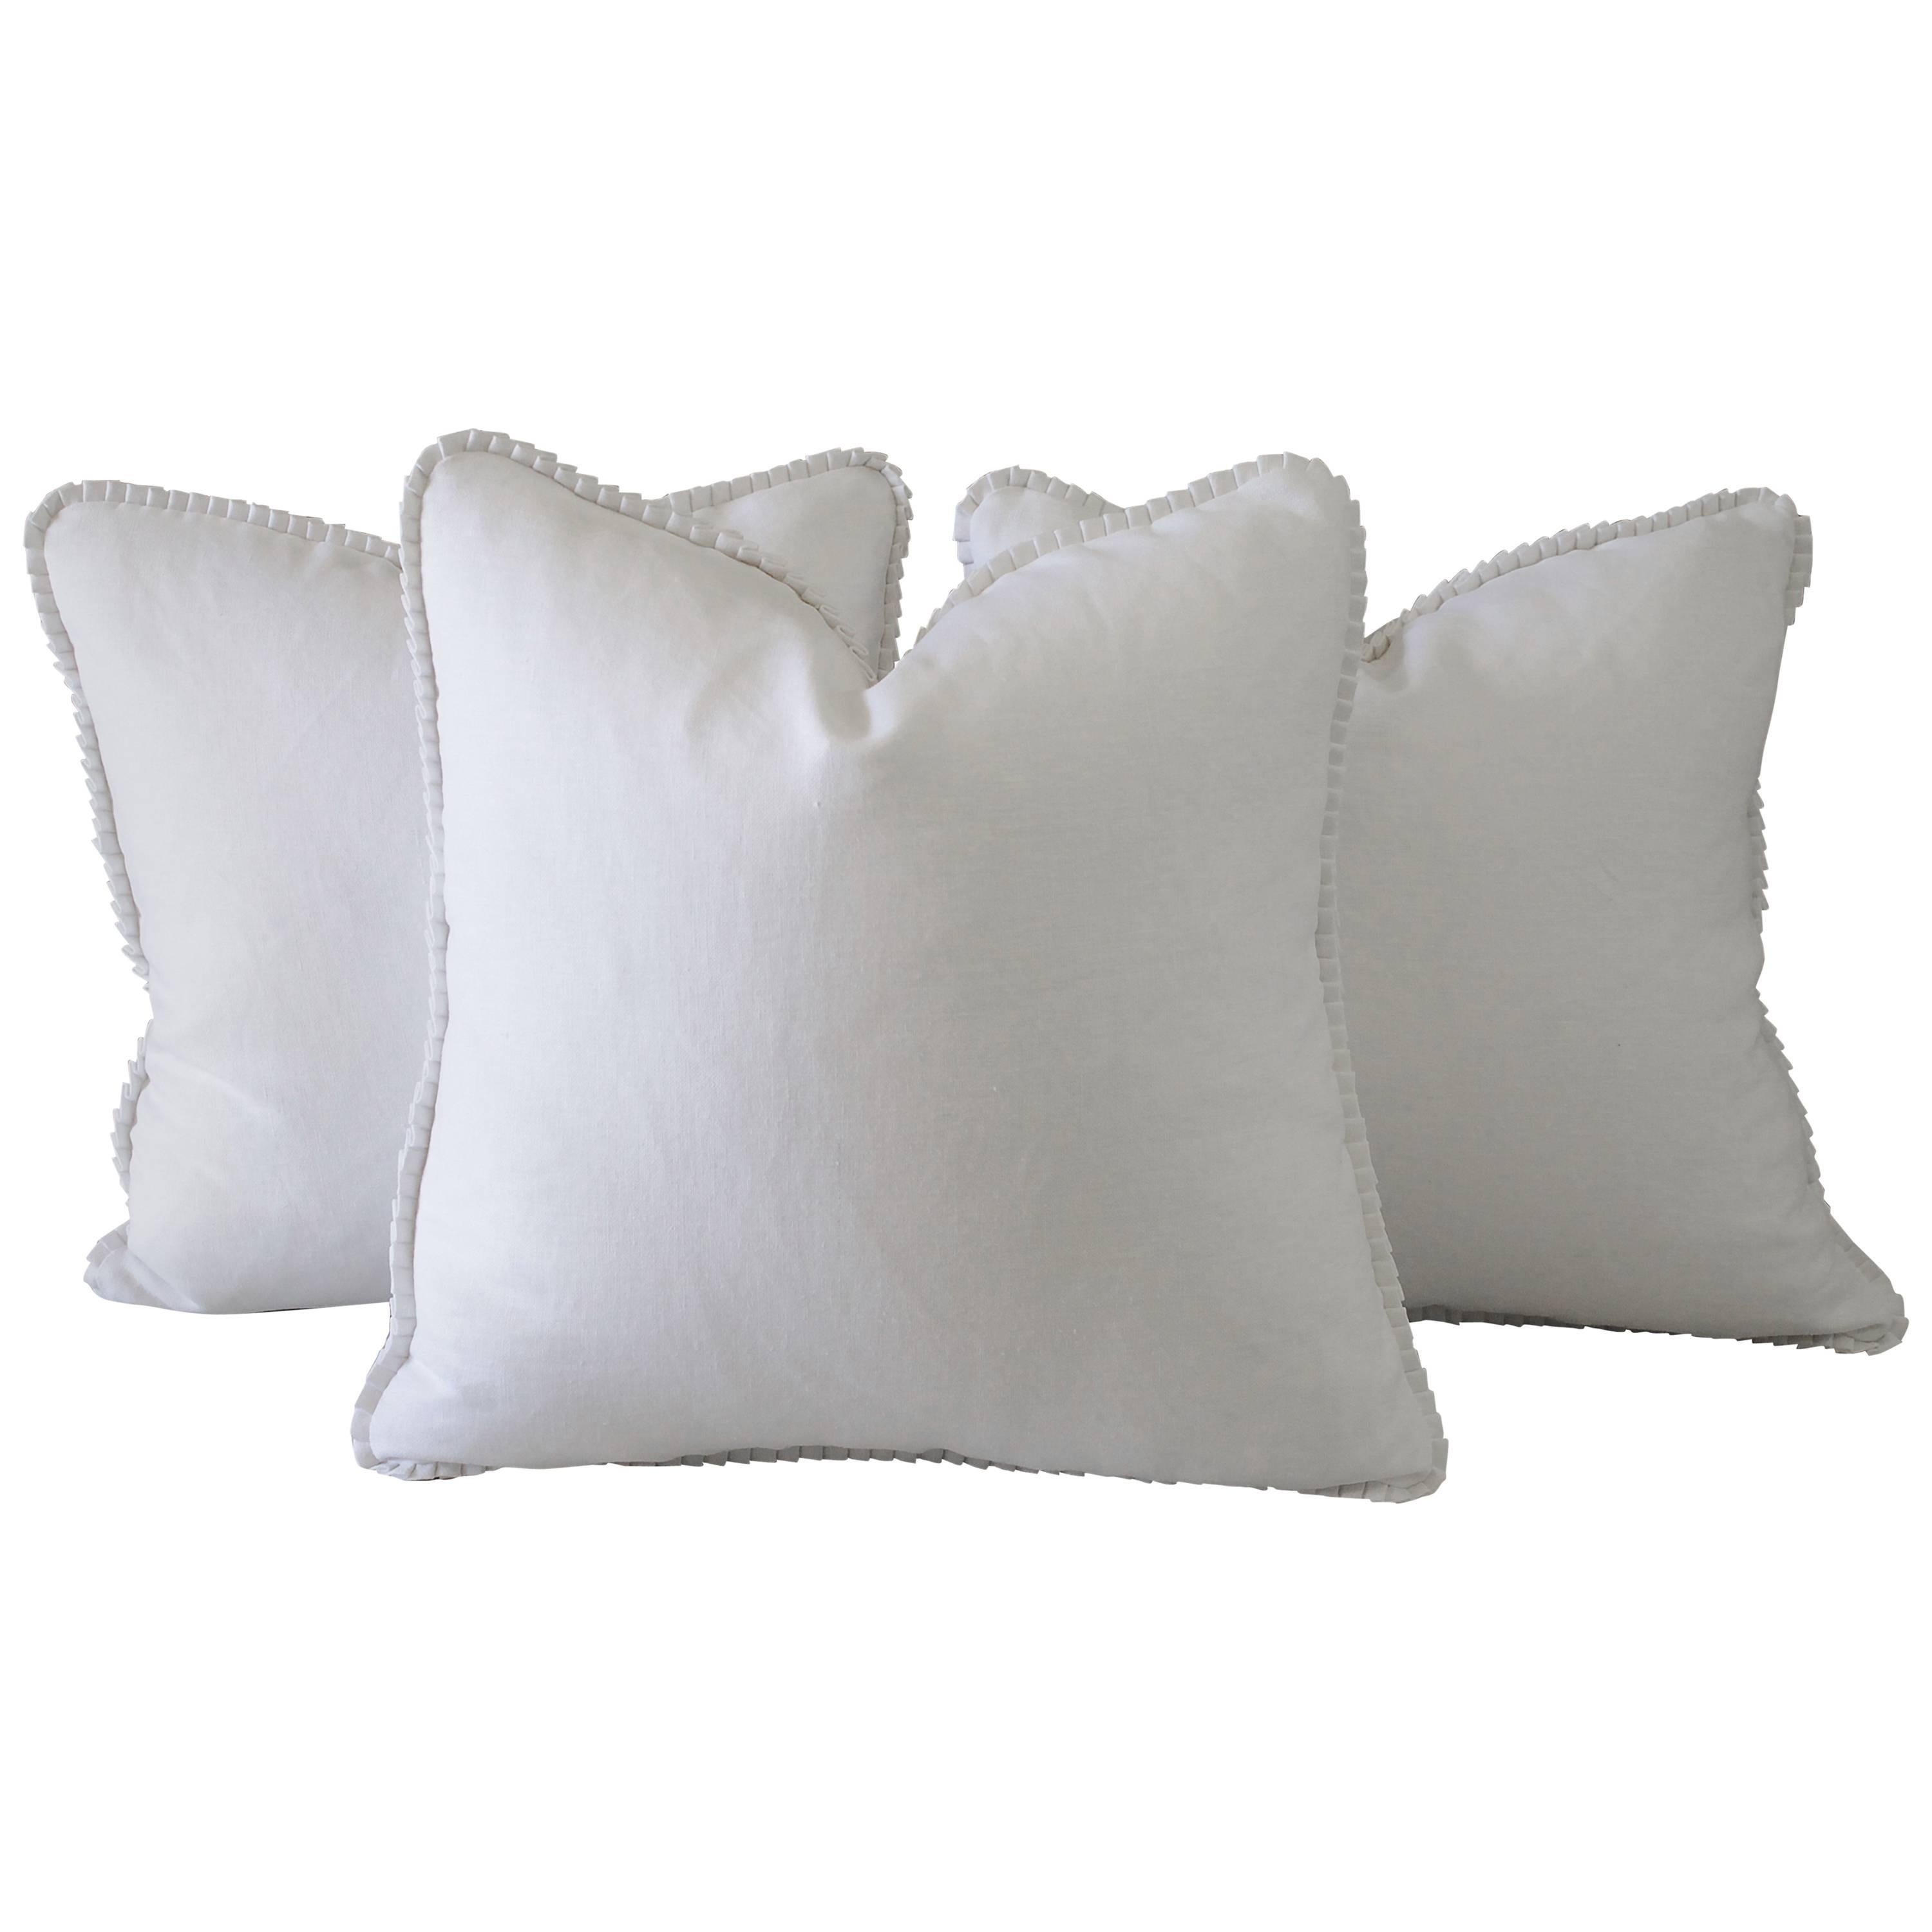 Custom-made luxury linen pillows with ruffle
Color: White
Size: 22x22
Zipper closure, overlocked seams, 1/2